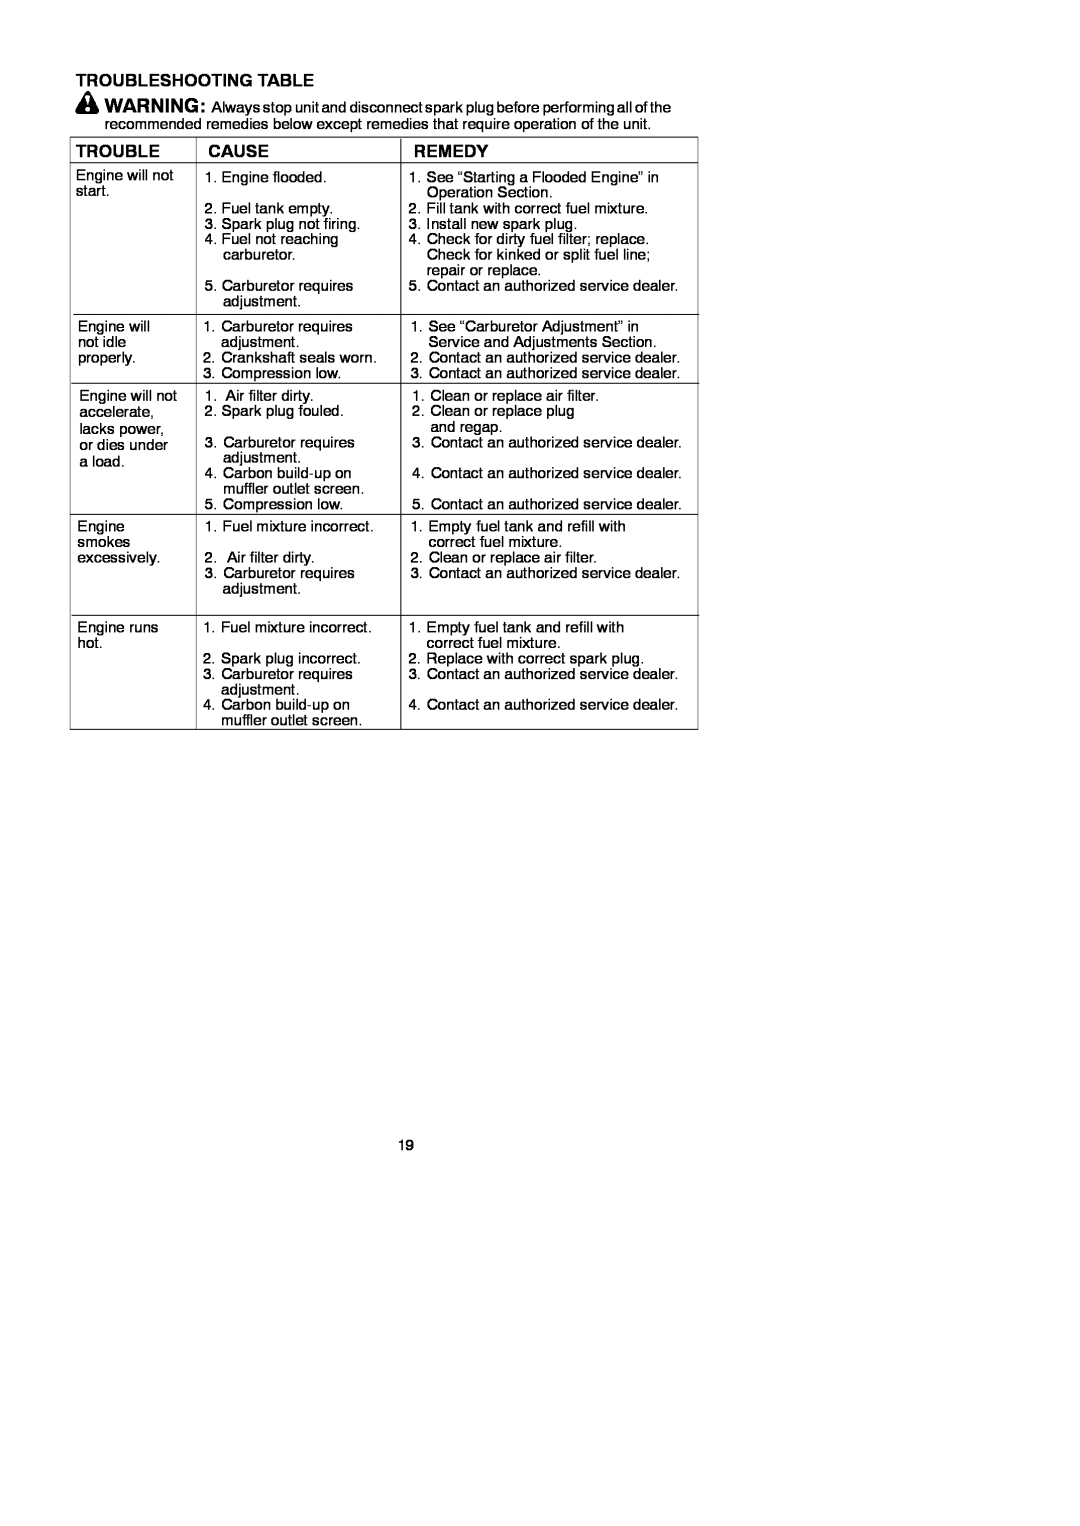 McCulloch 433L, 952715745, 115306026 instruction manual Troubleshooting Table, Cause, Remedy 